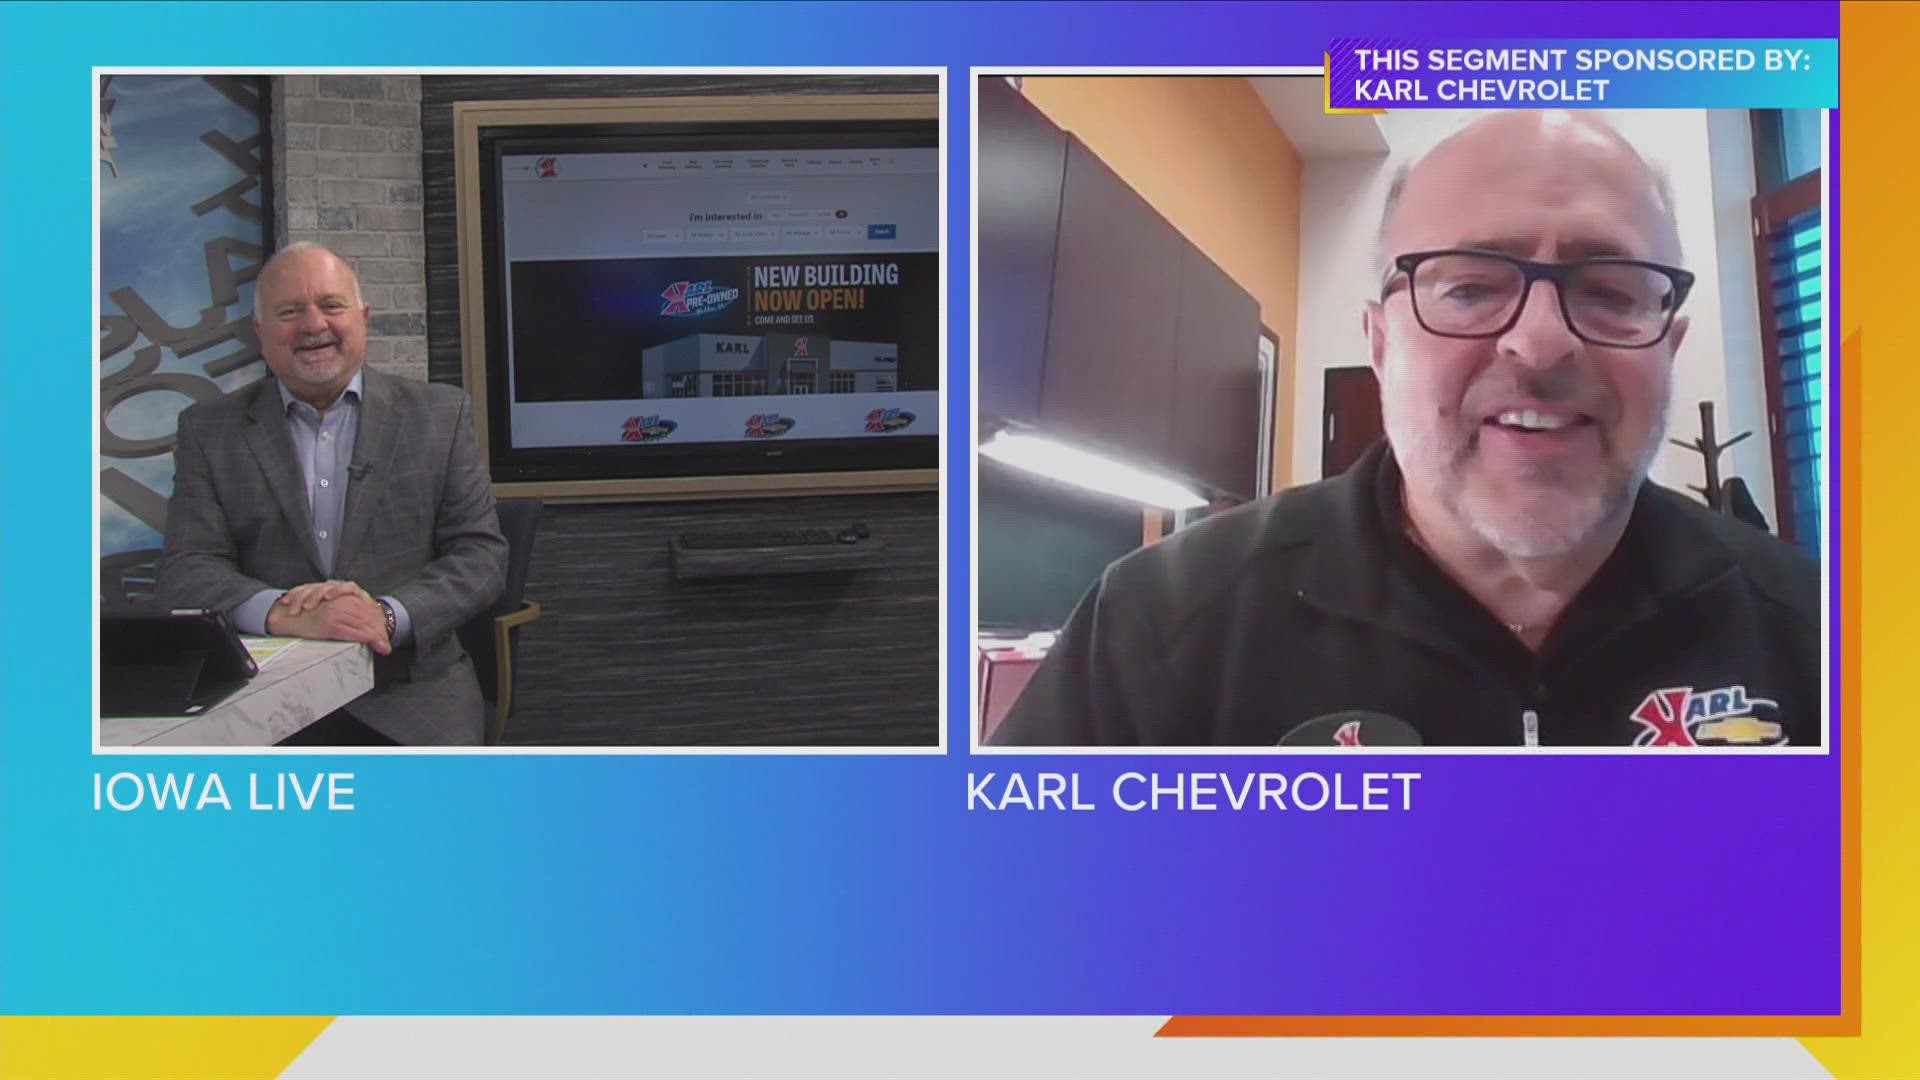 Some exciting stuff coming from Karl Chevrolet | Paid Content